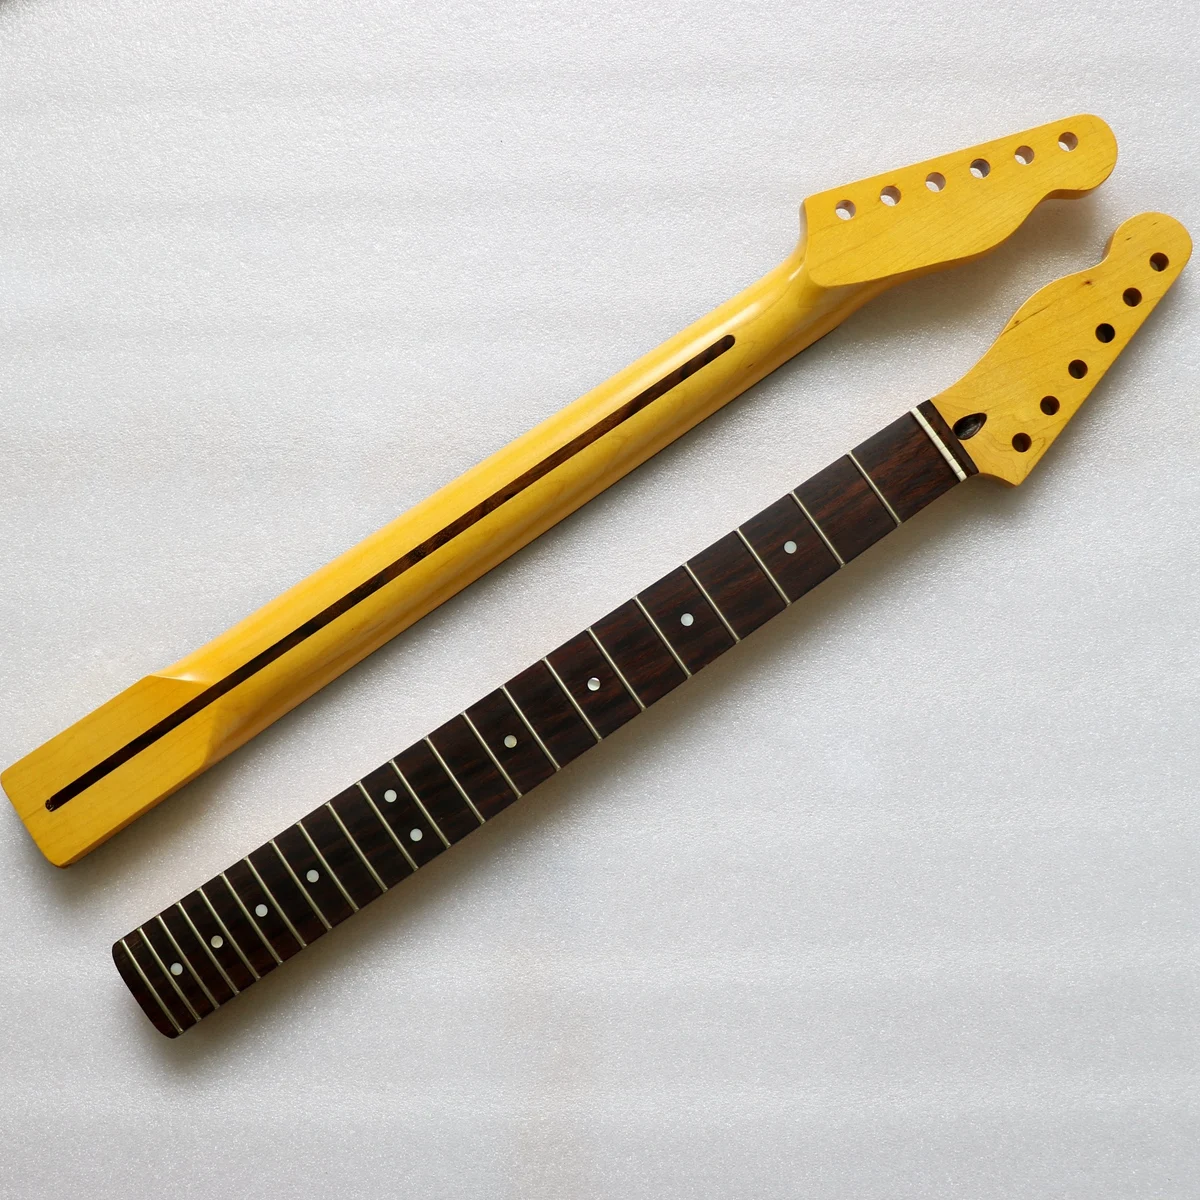 

Highly Engraved F Canadian Maple Rosewood Fingerboard Tele neck 22 Fret Light Yellow Left Hand Guitar Stem